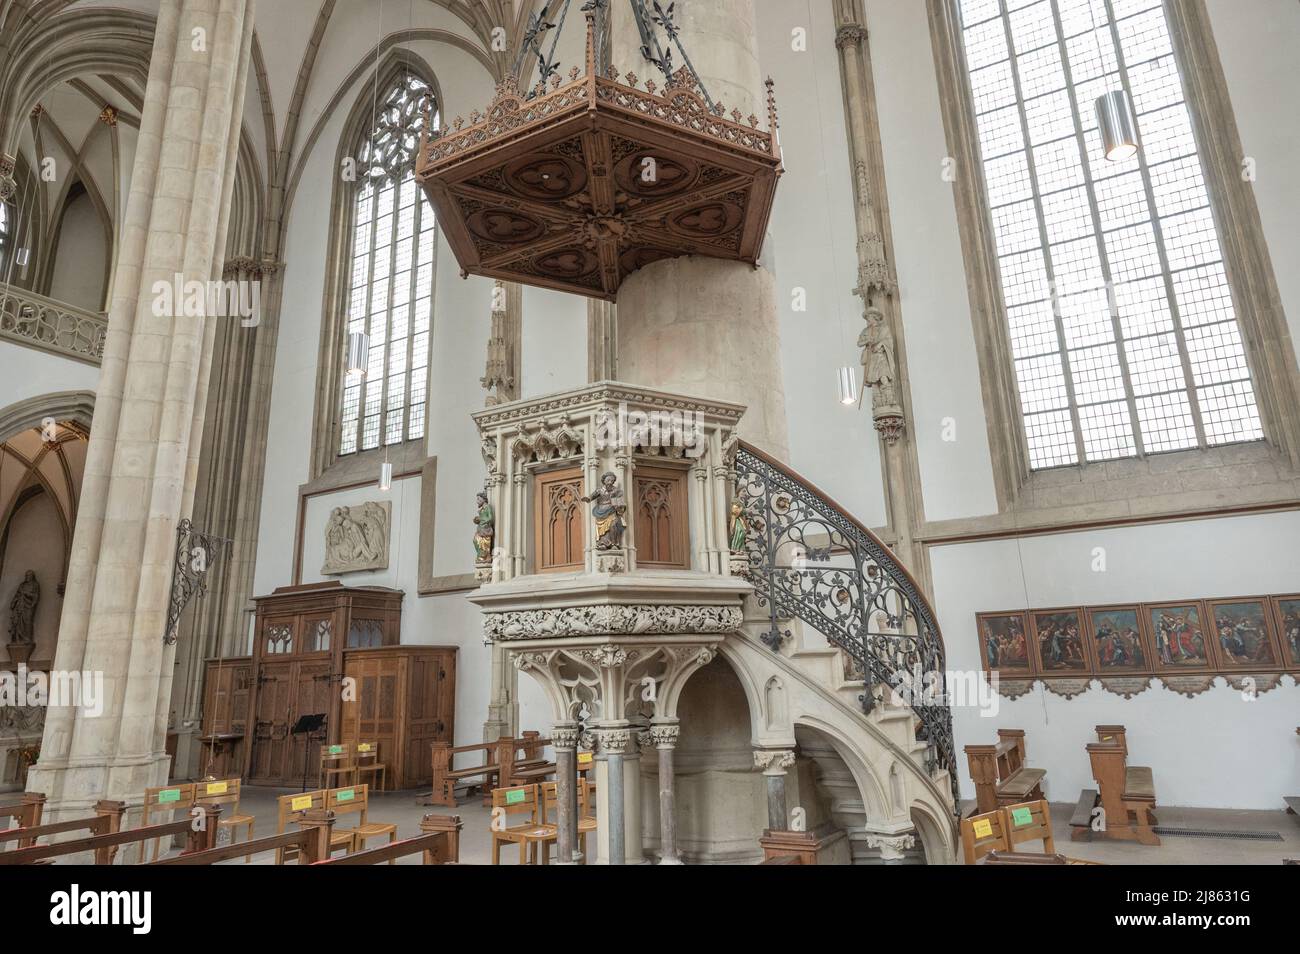 Cologne, May 2022: Interior of Cologne Cathedral ... At 144 meters, the slender nave of Cologne Cathedral leading to the chancel is the longest nave i Stock Photo